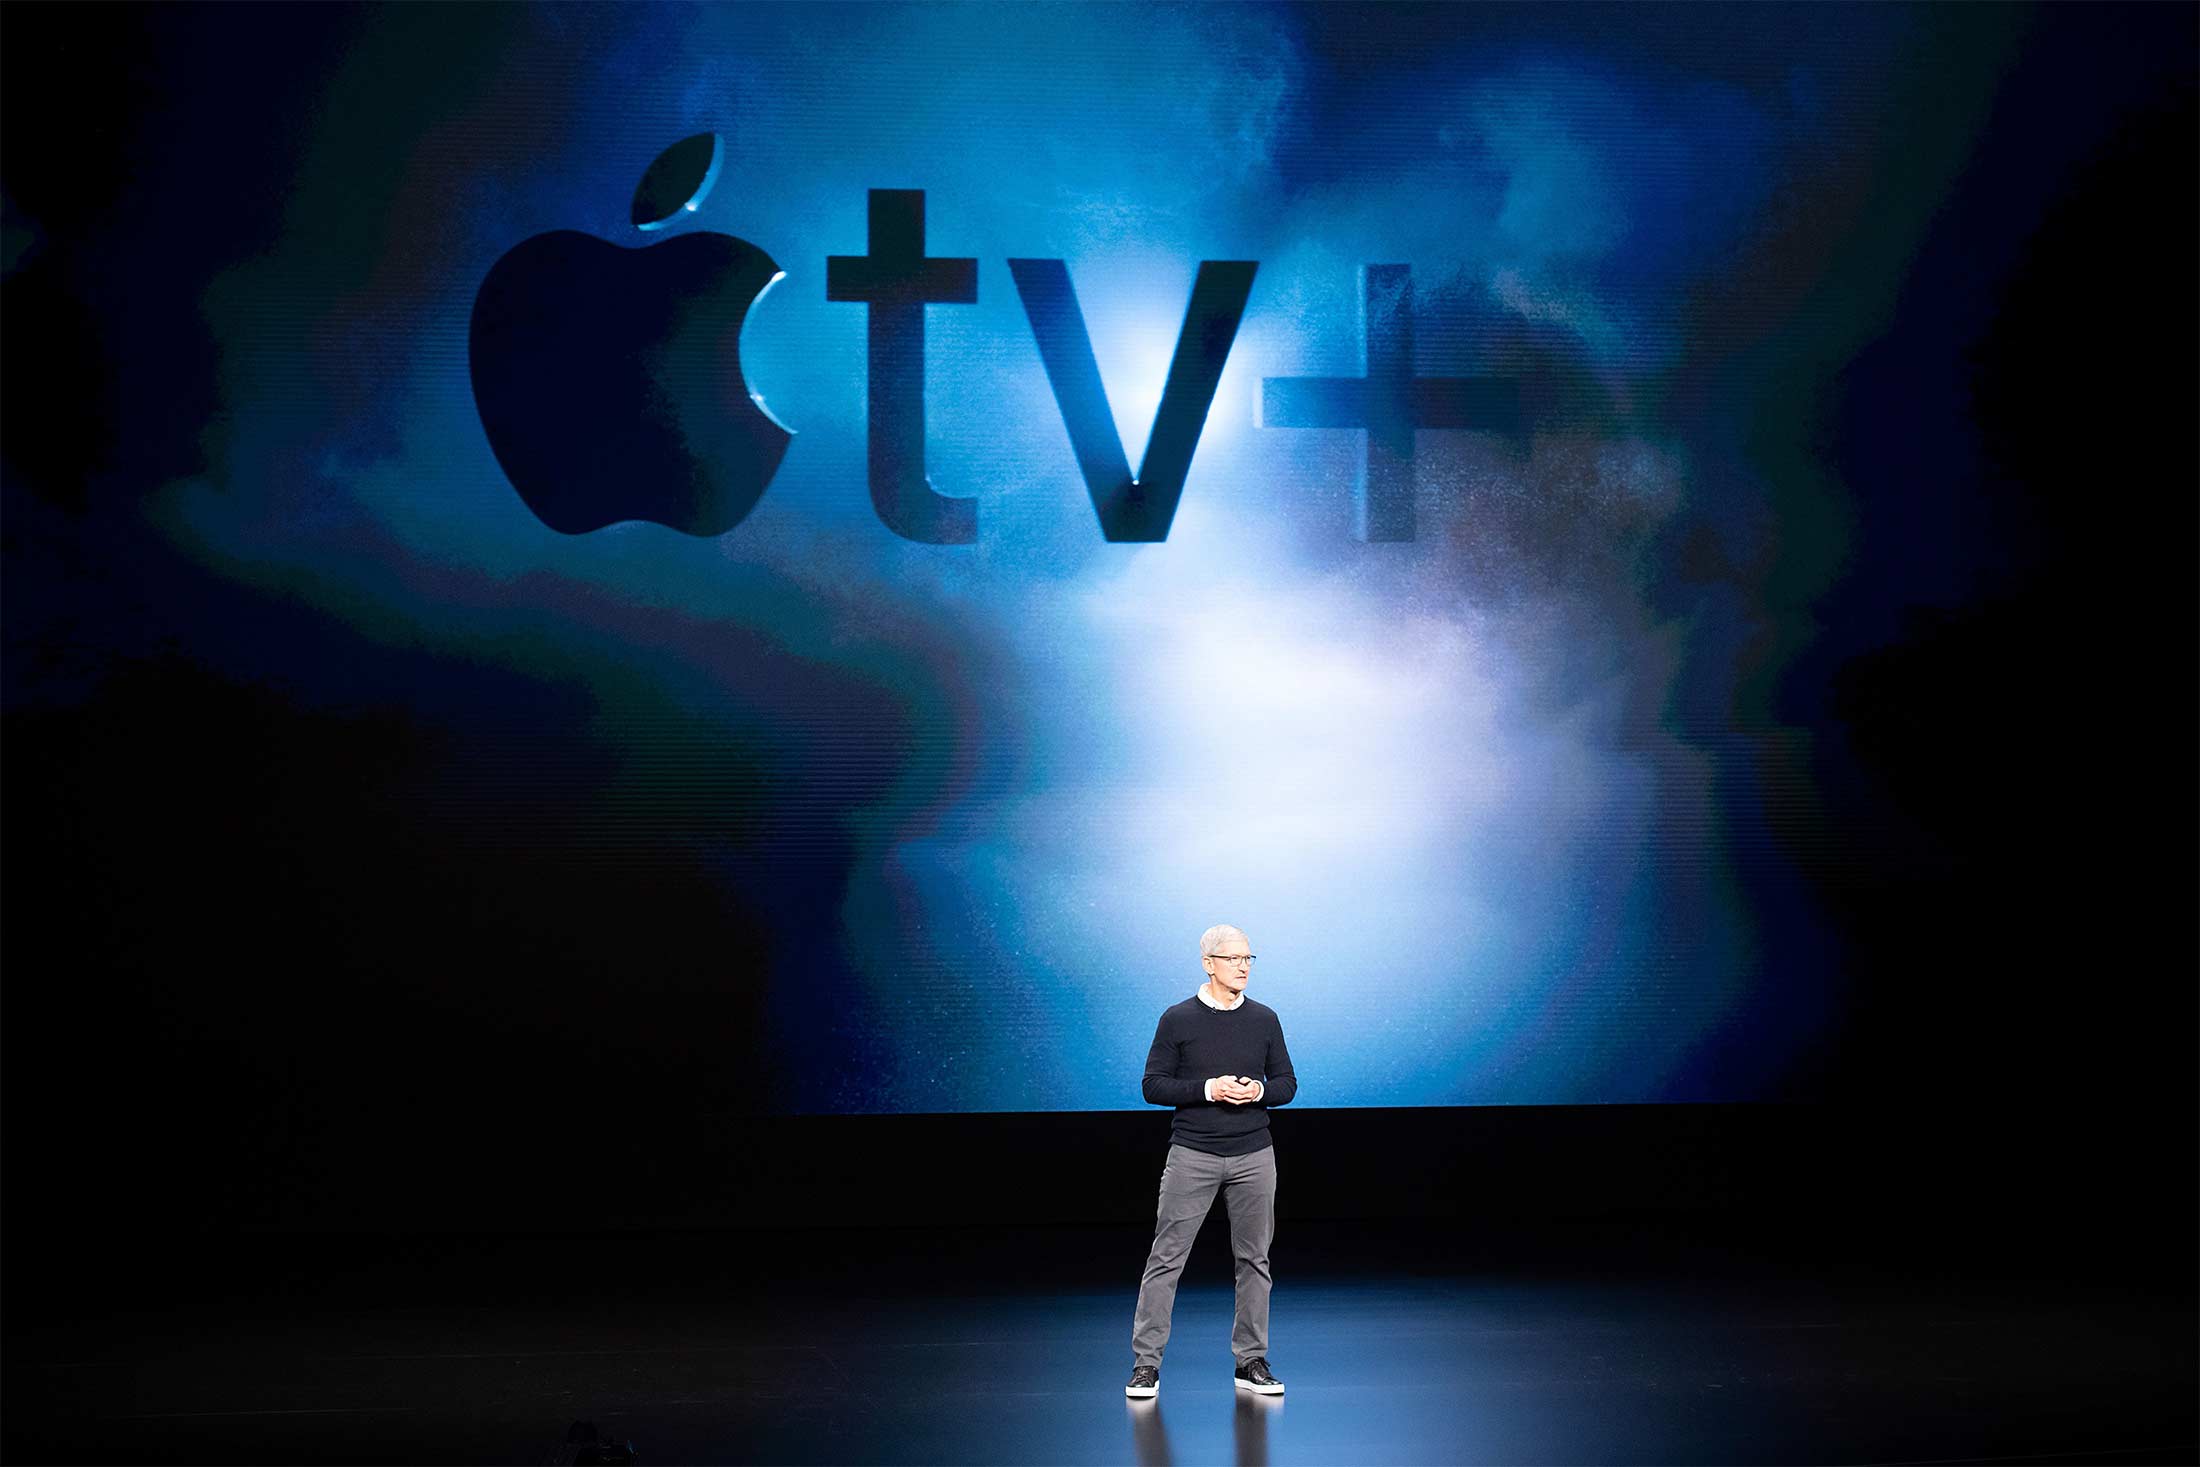 Tim Cook introduces Apple TV+ during a launch event at Apple headquarters on March 25.